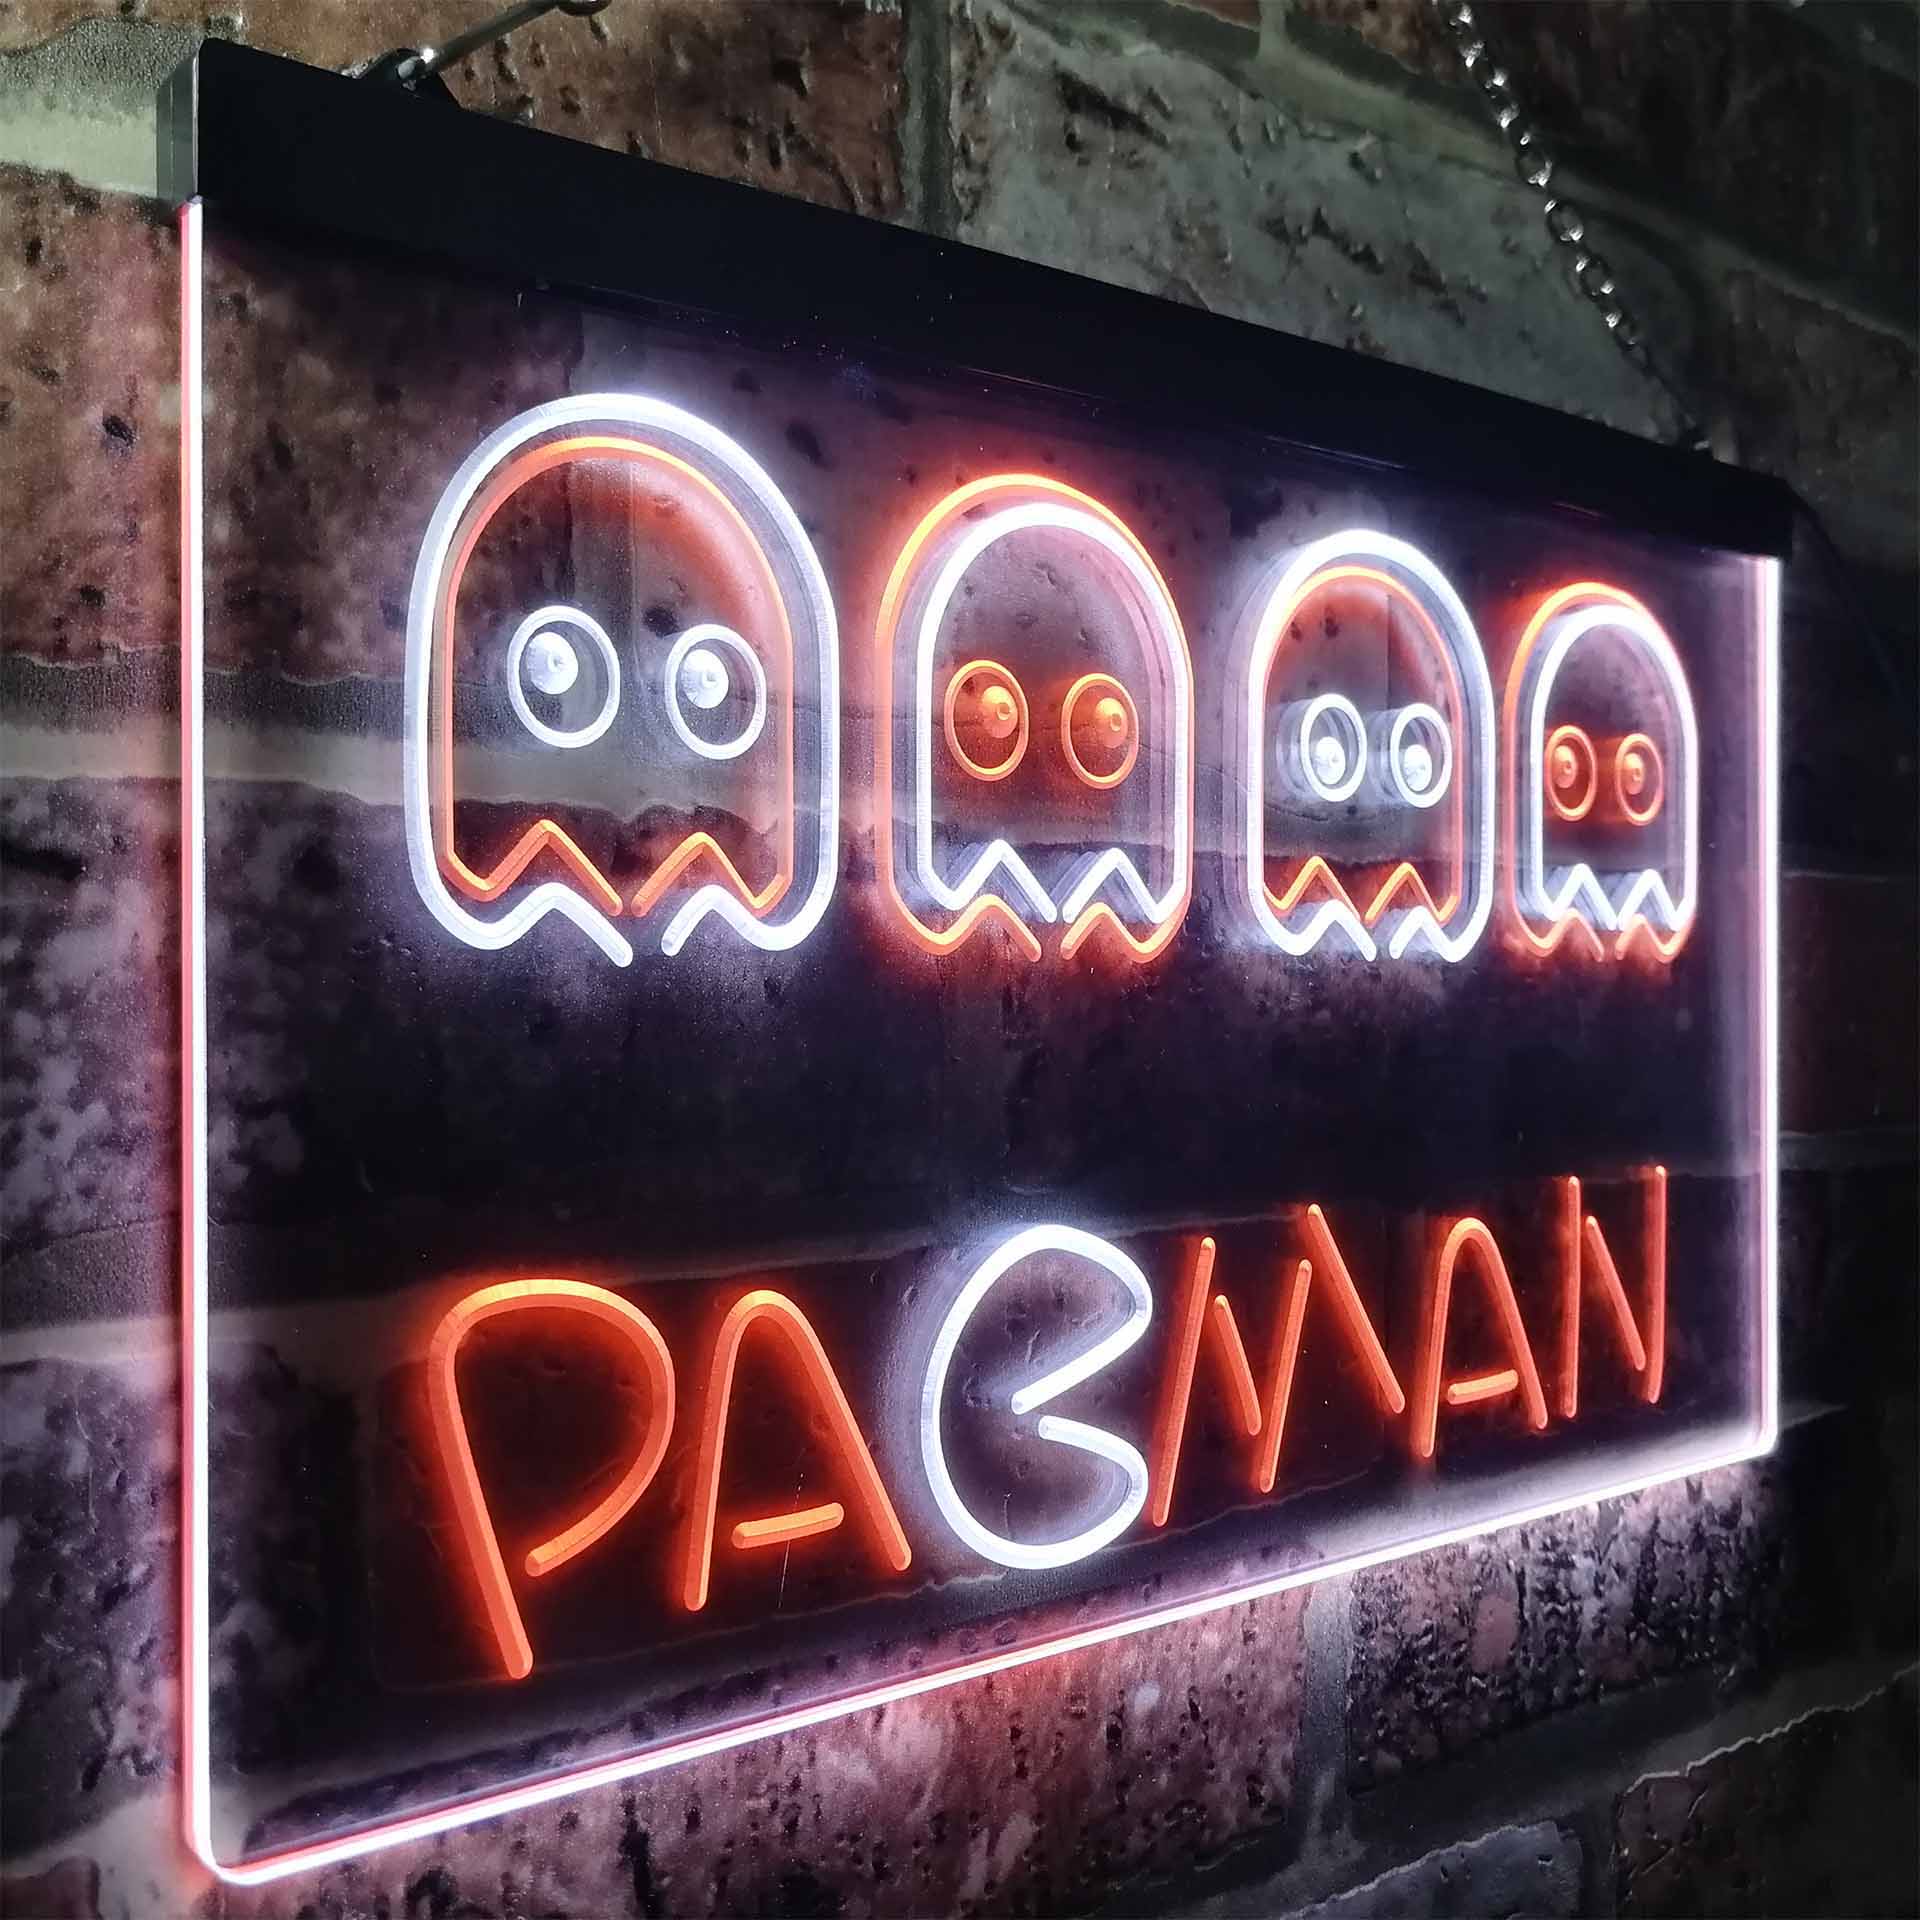 Pacman Game Room Neon-Like LED Sign